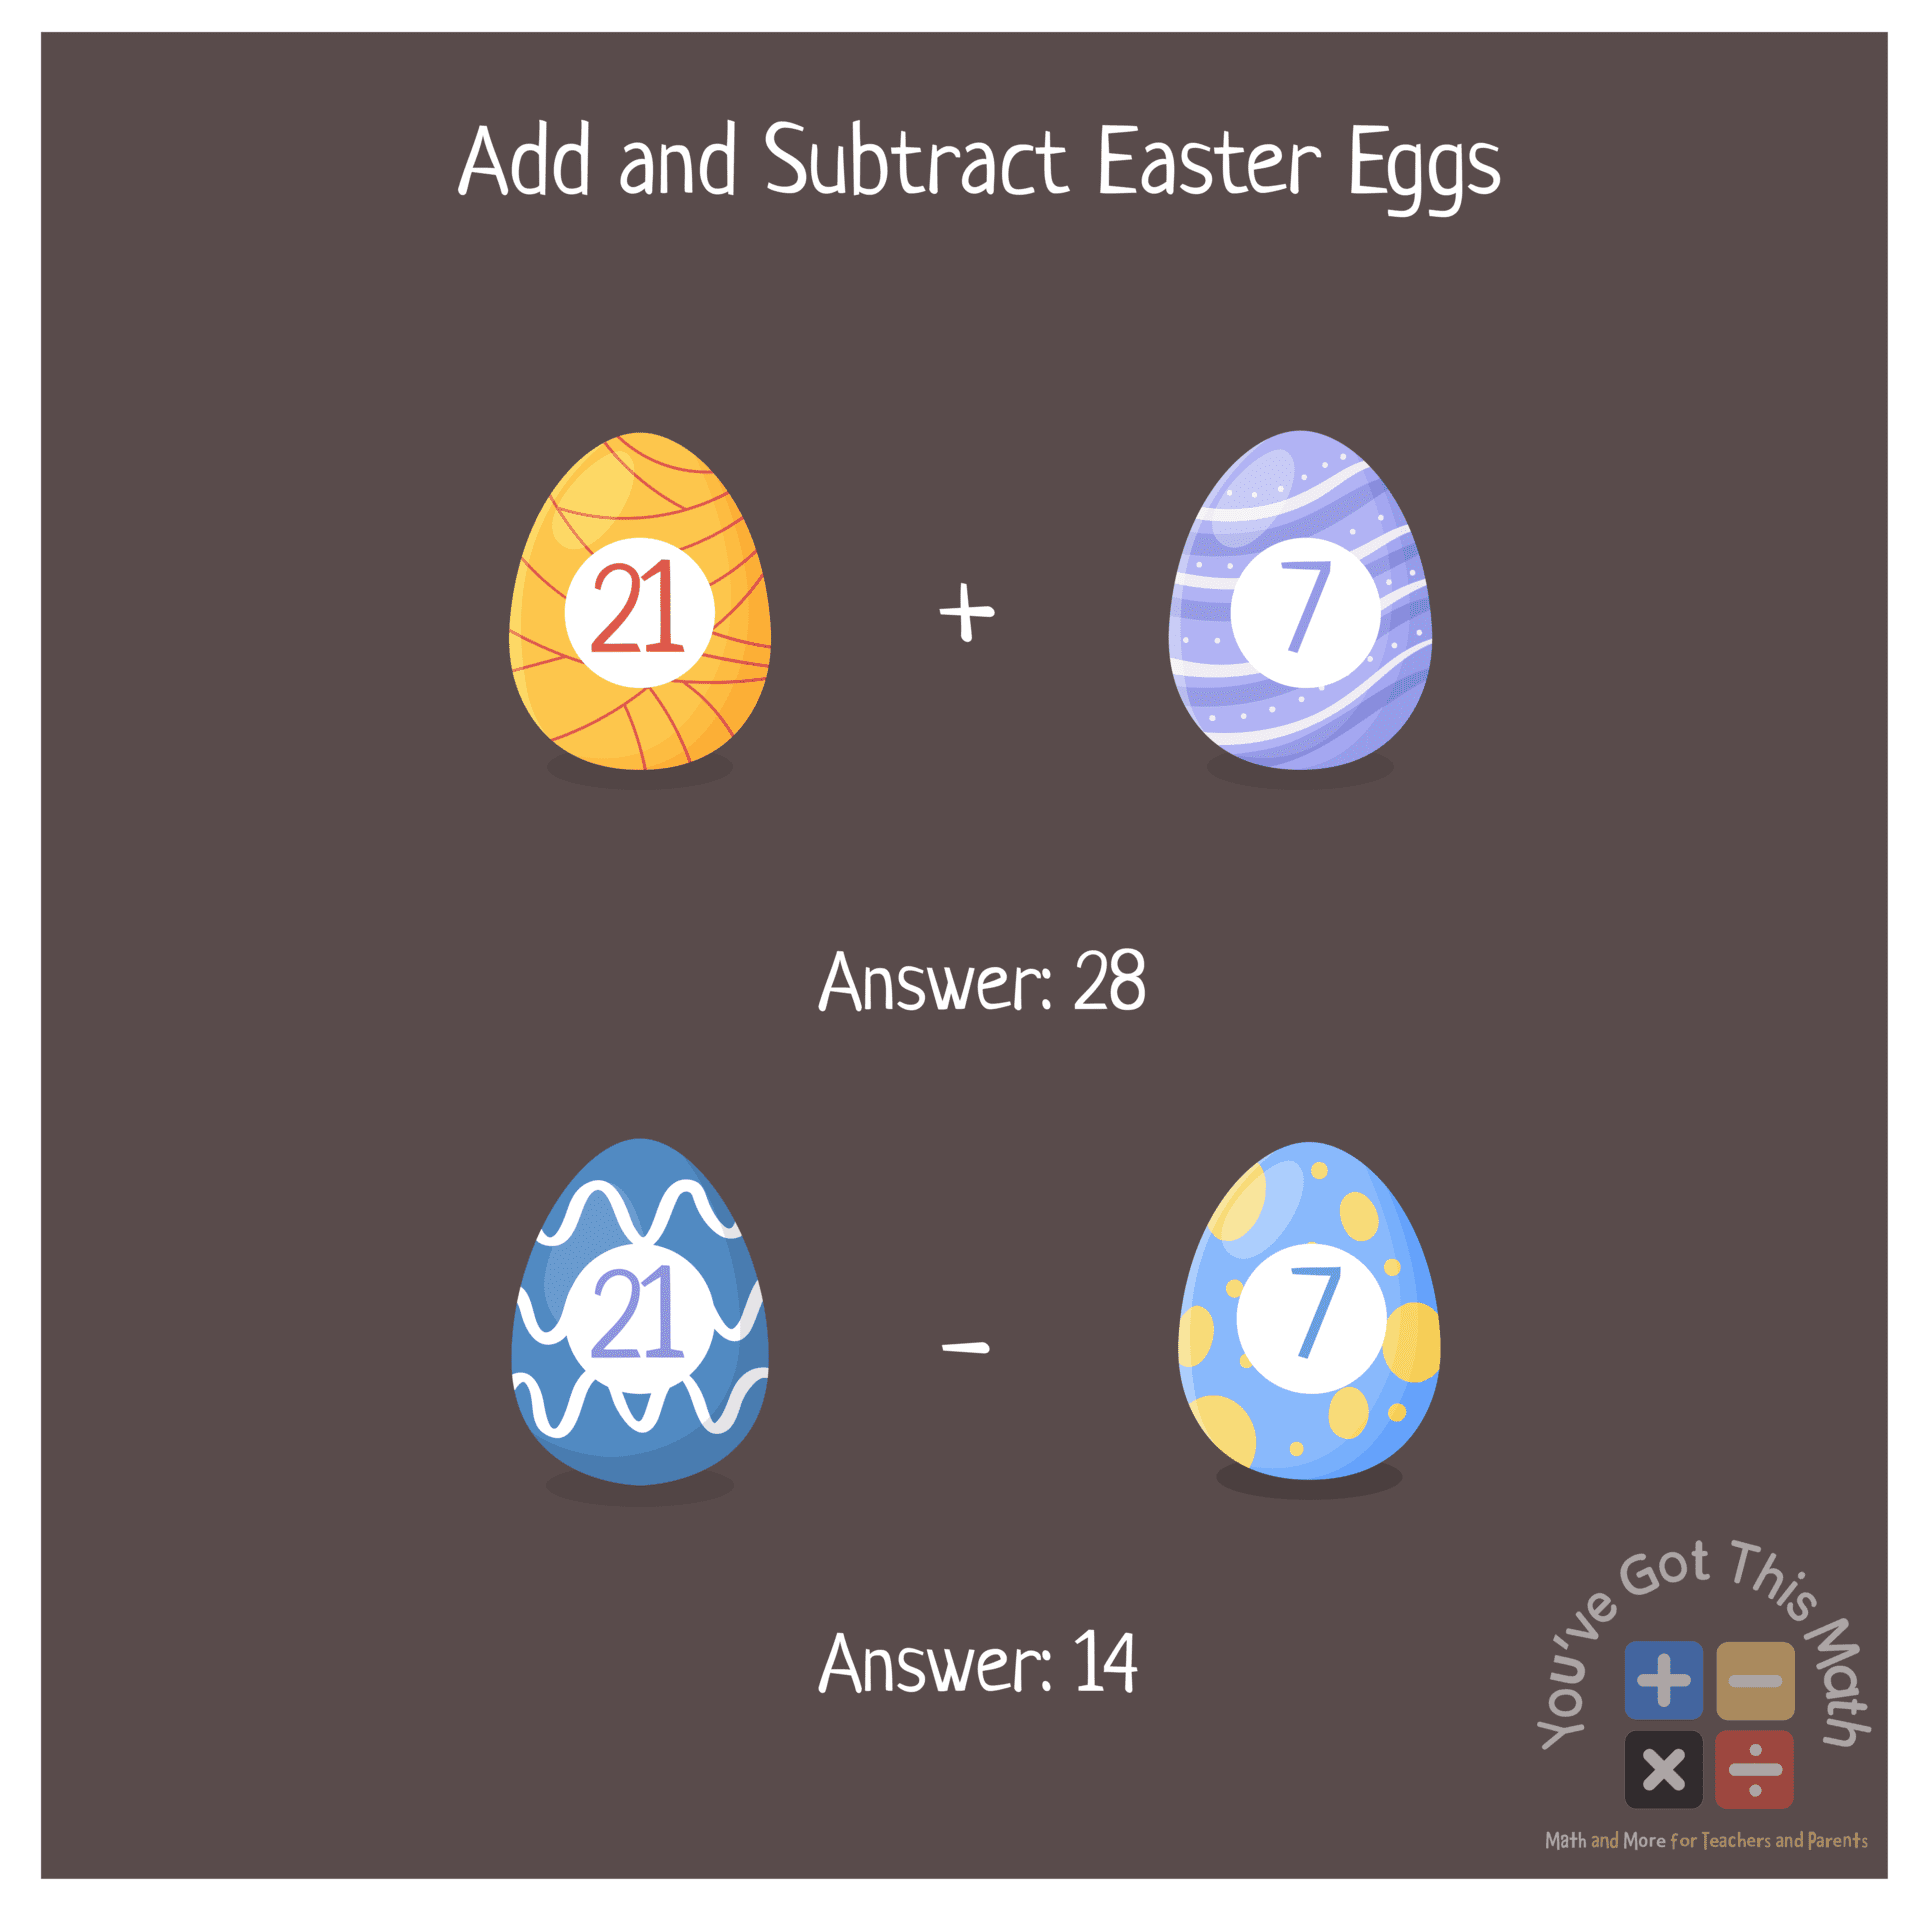 Add and Subtract the Easter Eggs